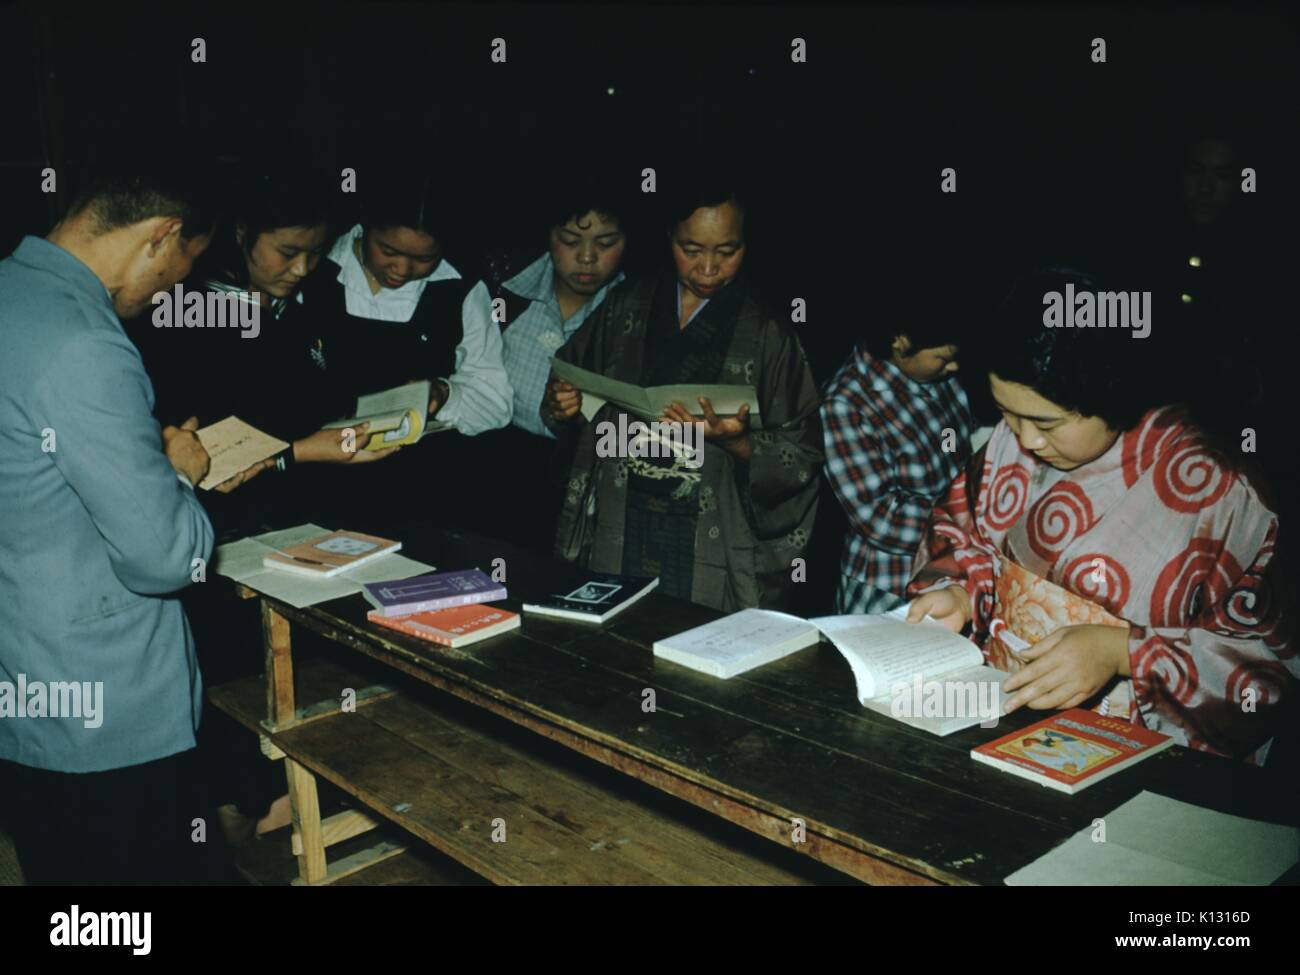 Japanese churchgoers reading prayer books at a mission church, the women wearing decorative kimonos, all with looks of concentration, Japan, 1952. Stock Photo